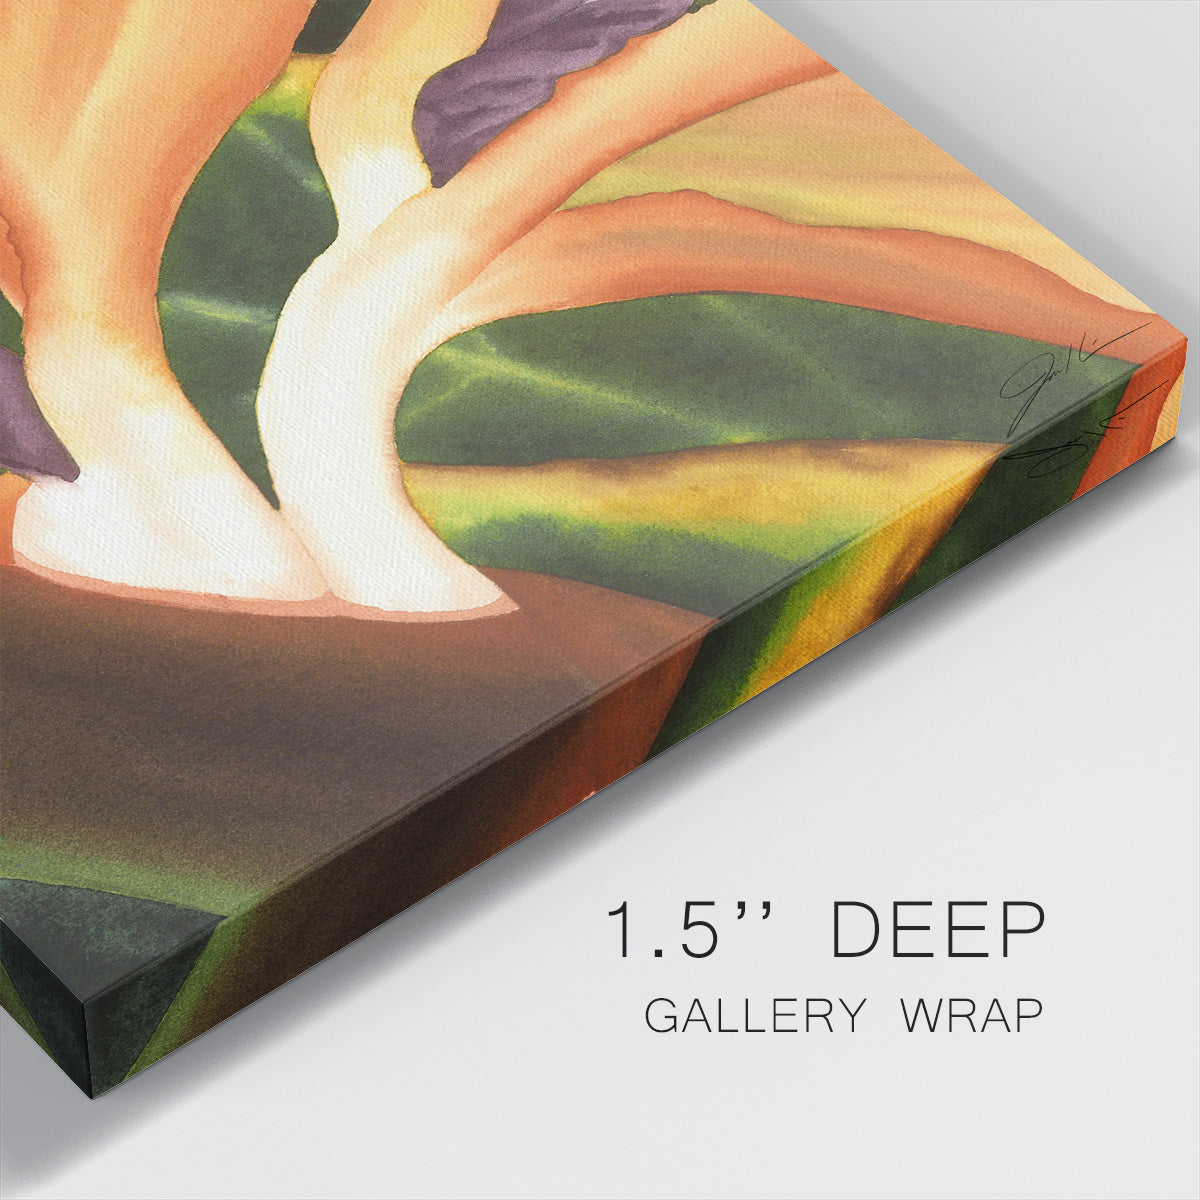 Bird of Paradise Tile III-Premium Gallery Wrapped Canvas - Ready to Hang